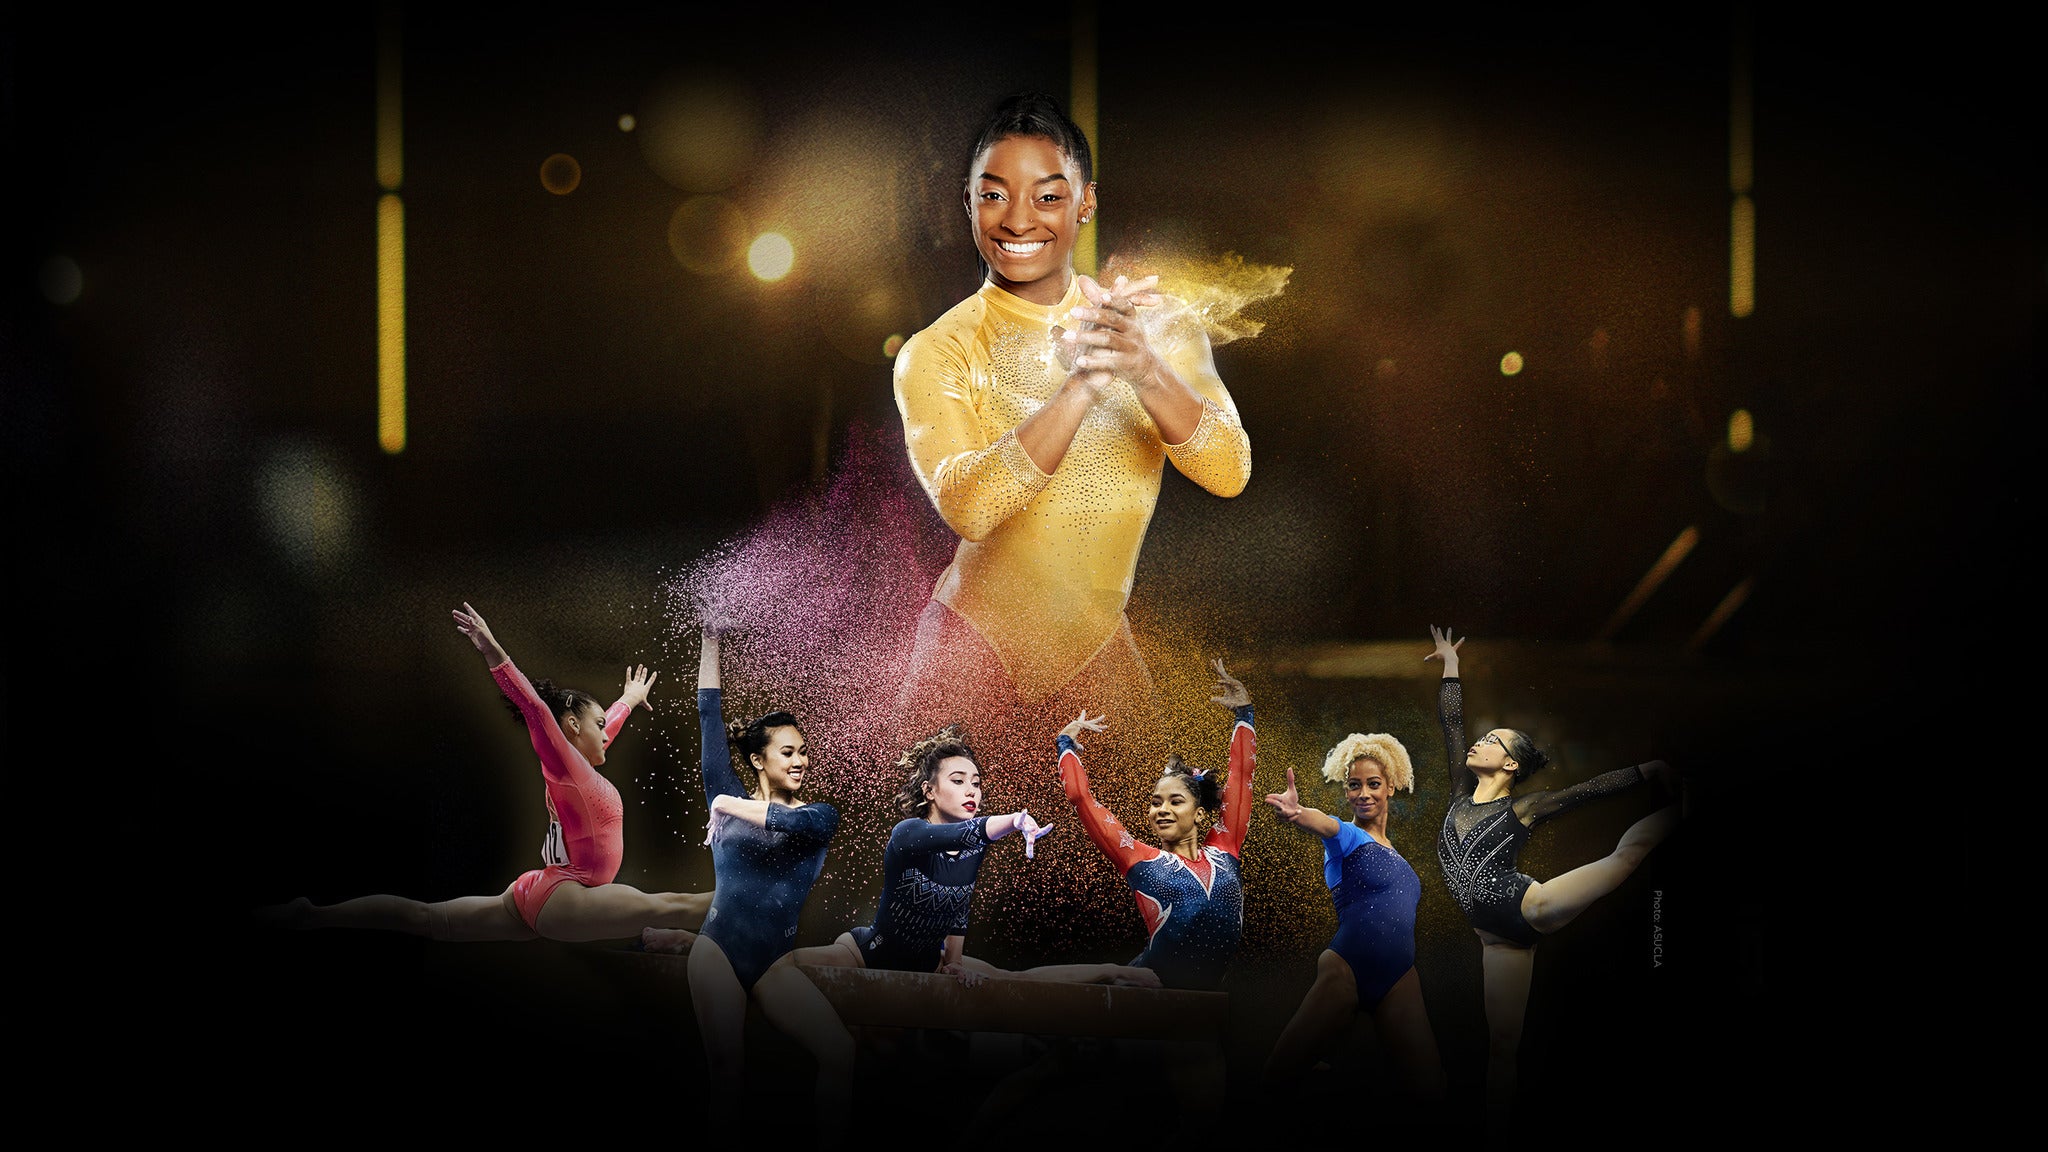 G.O.A.T. Gold Over America Tour Starring Simone Biles in San Francisco promo photo for Official Platinum presale offer code